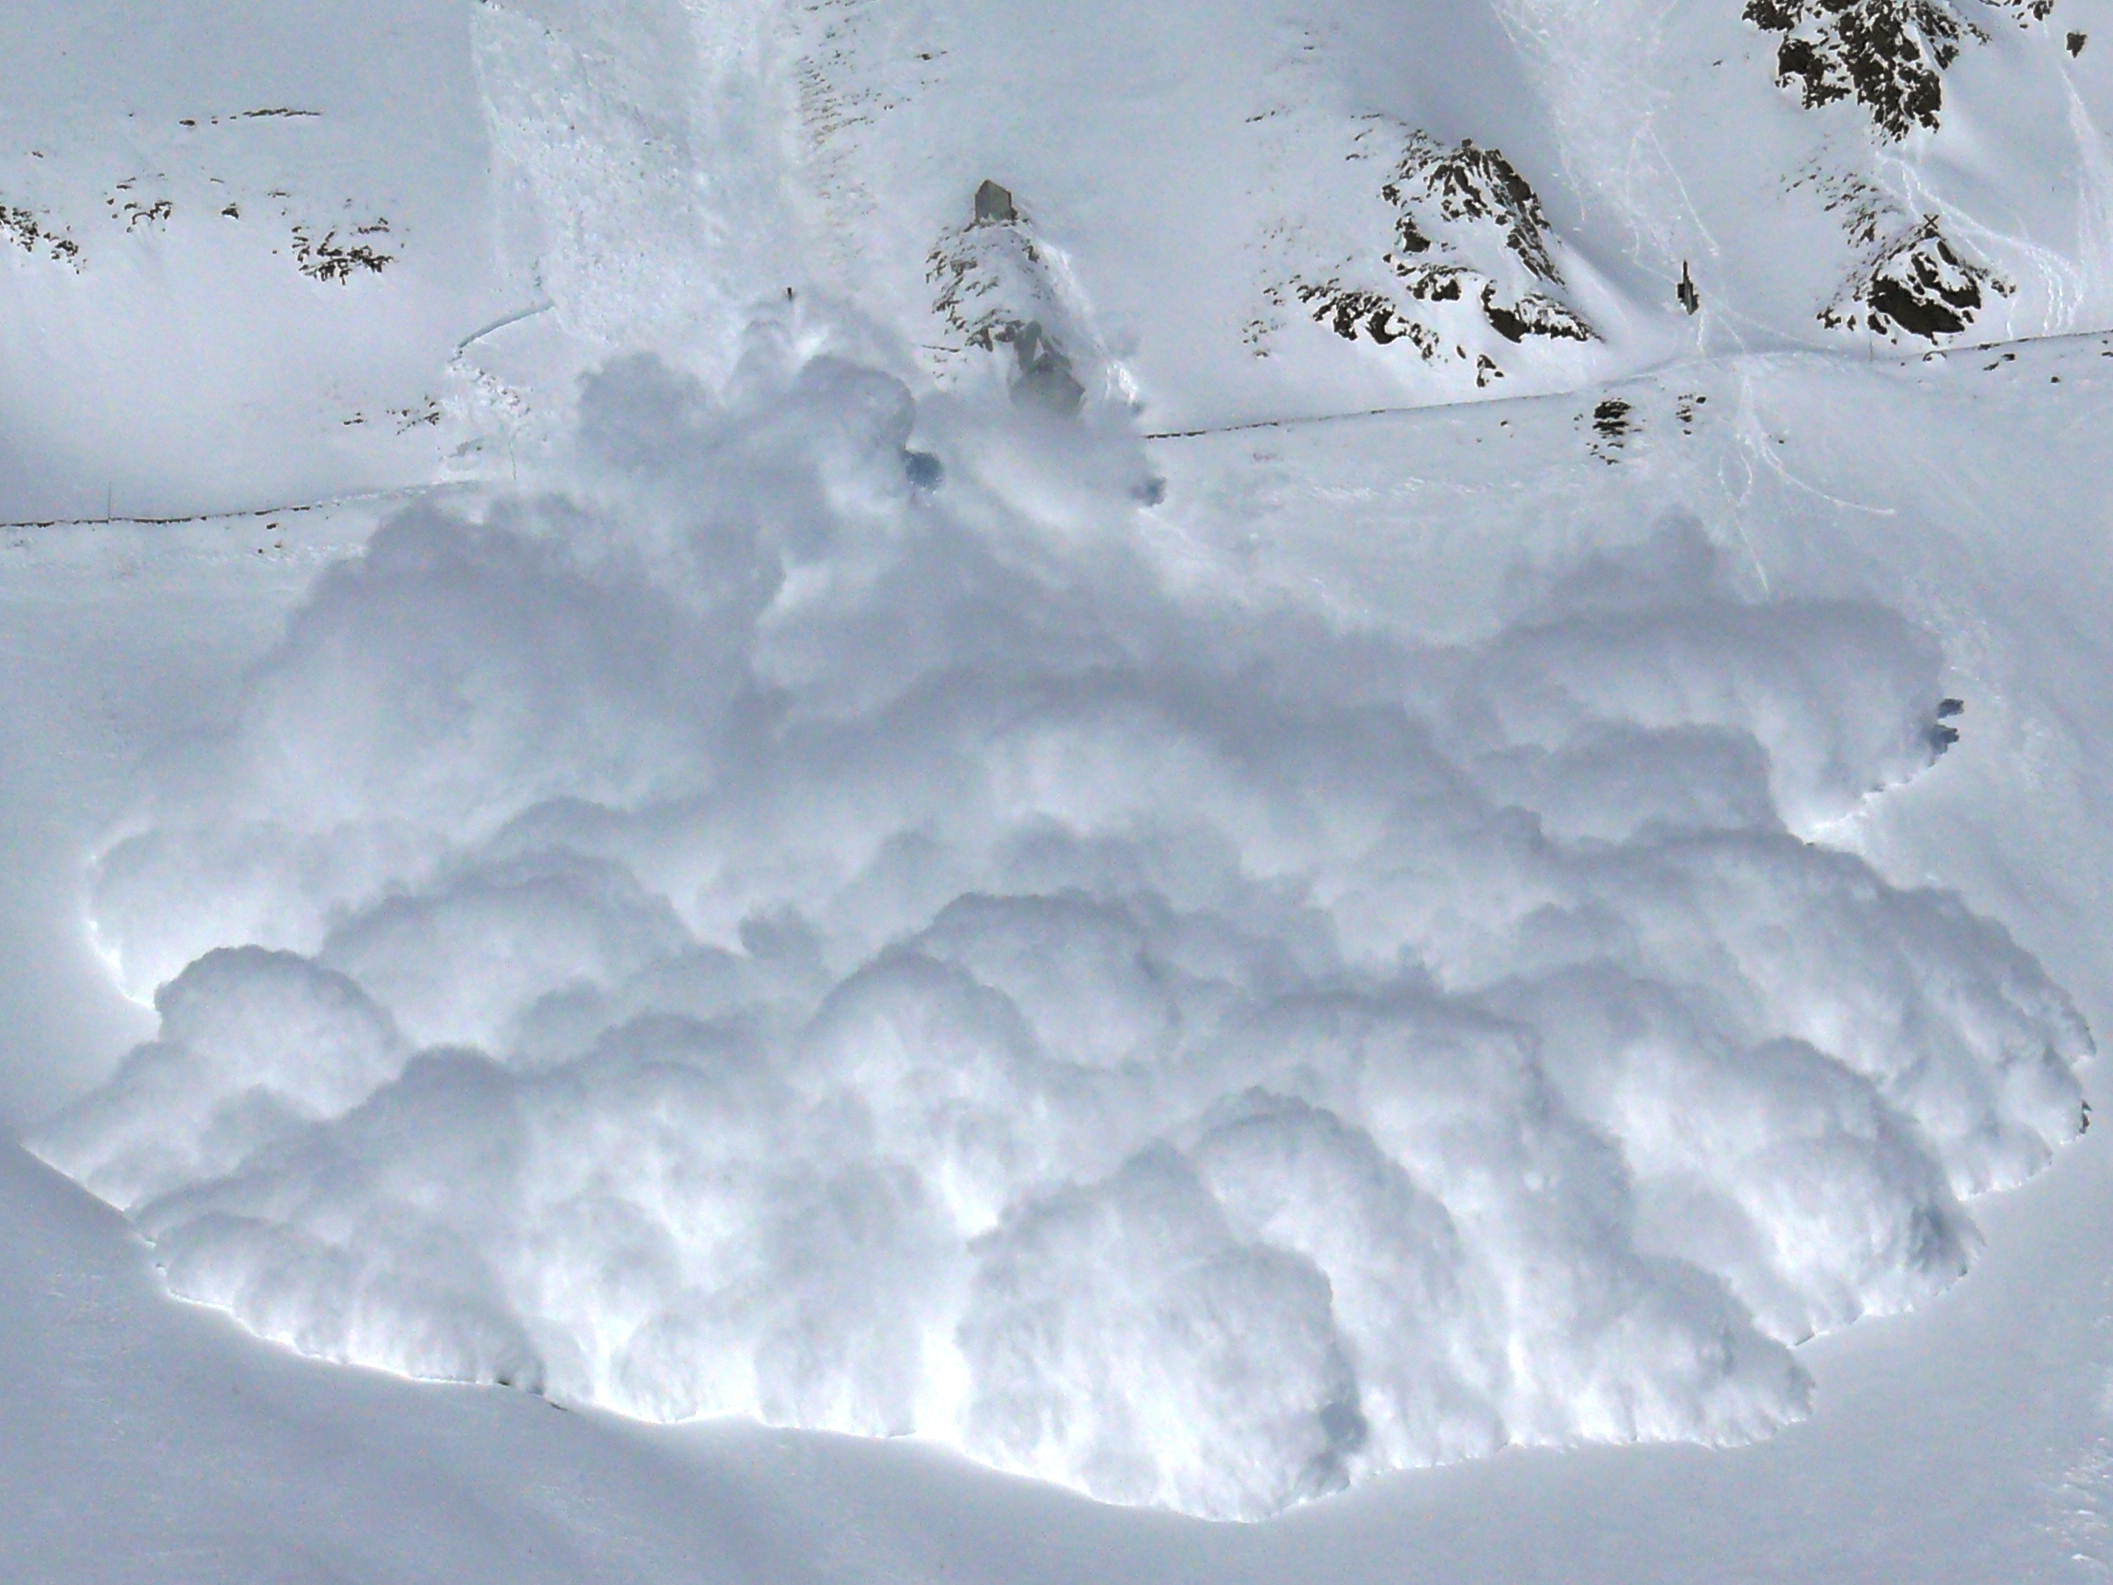 Stock image of avalanche.